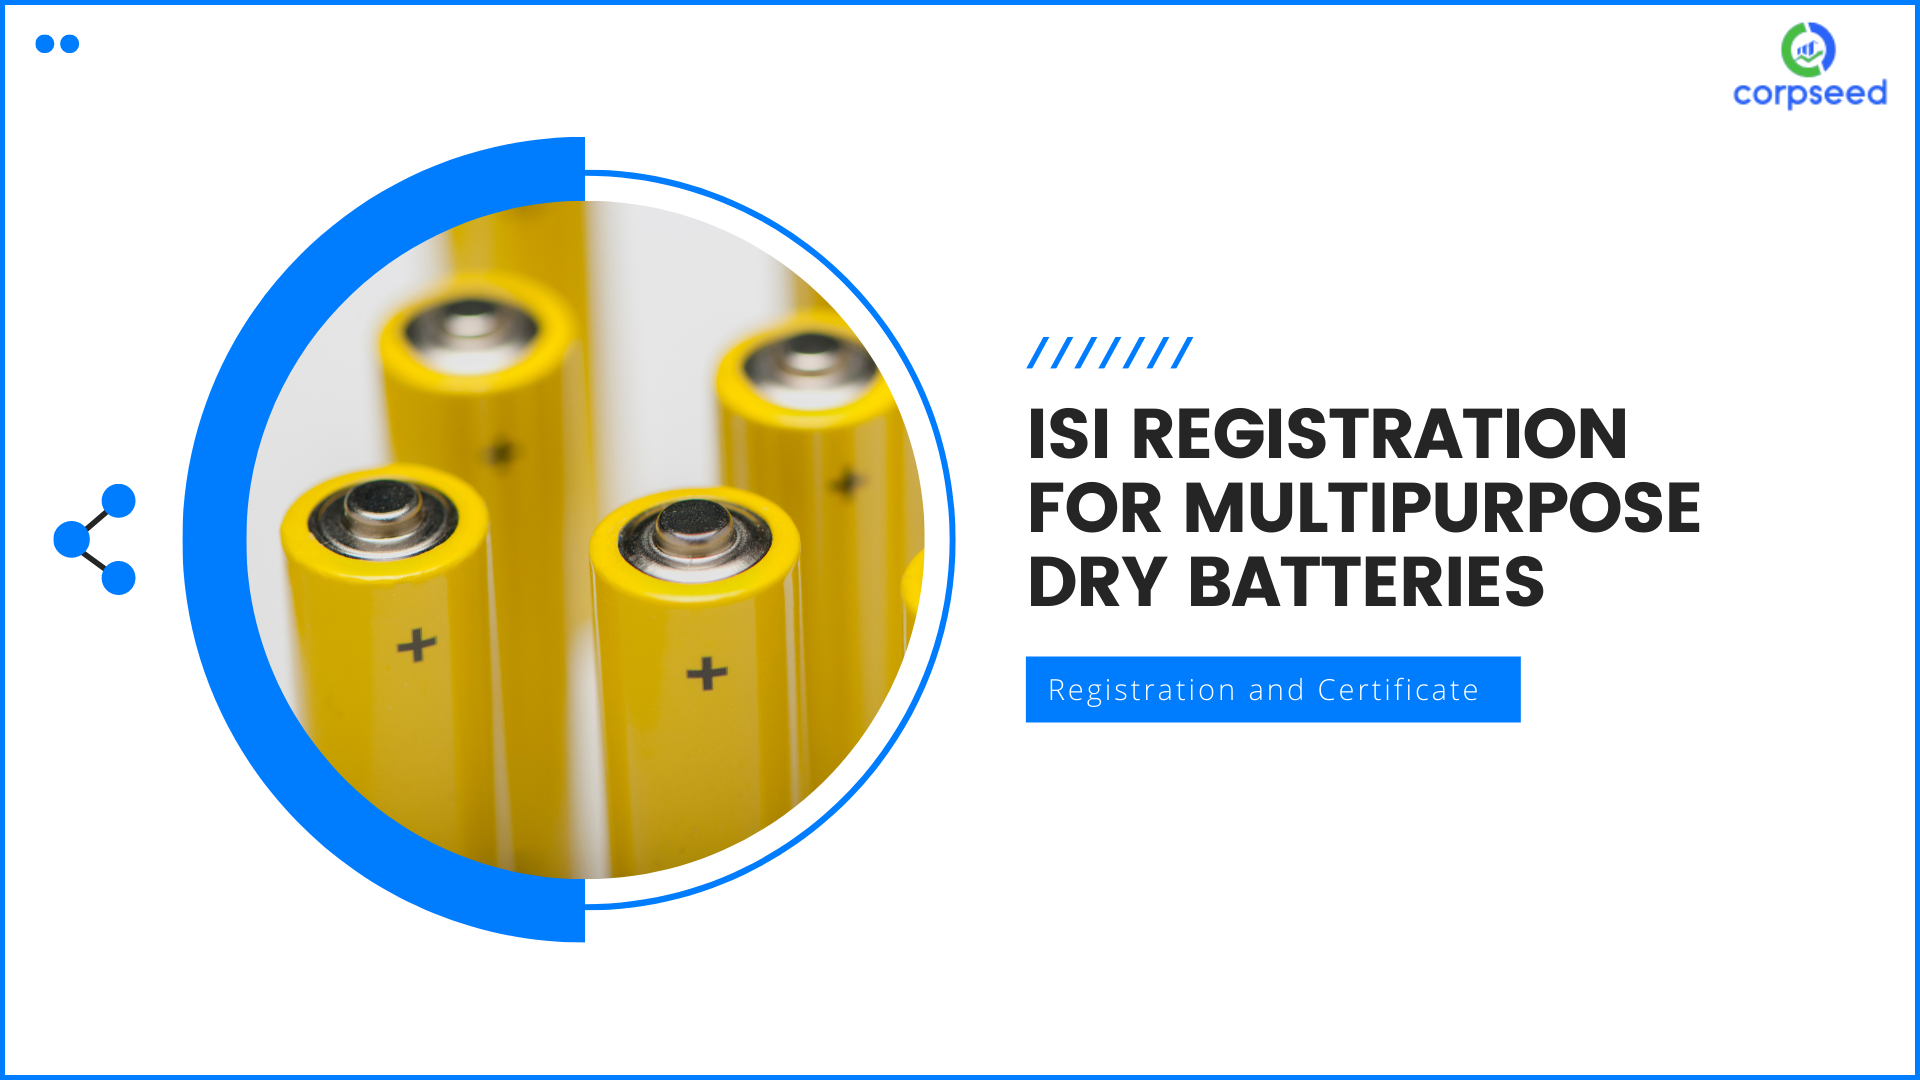 isi-registration-for-multipurpose-dry-batteries-is-8144_corpseed.png